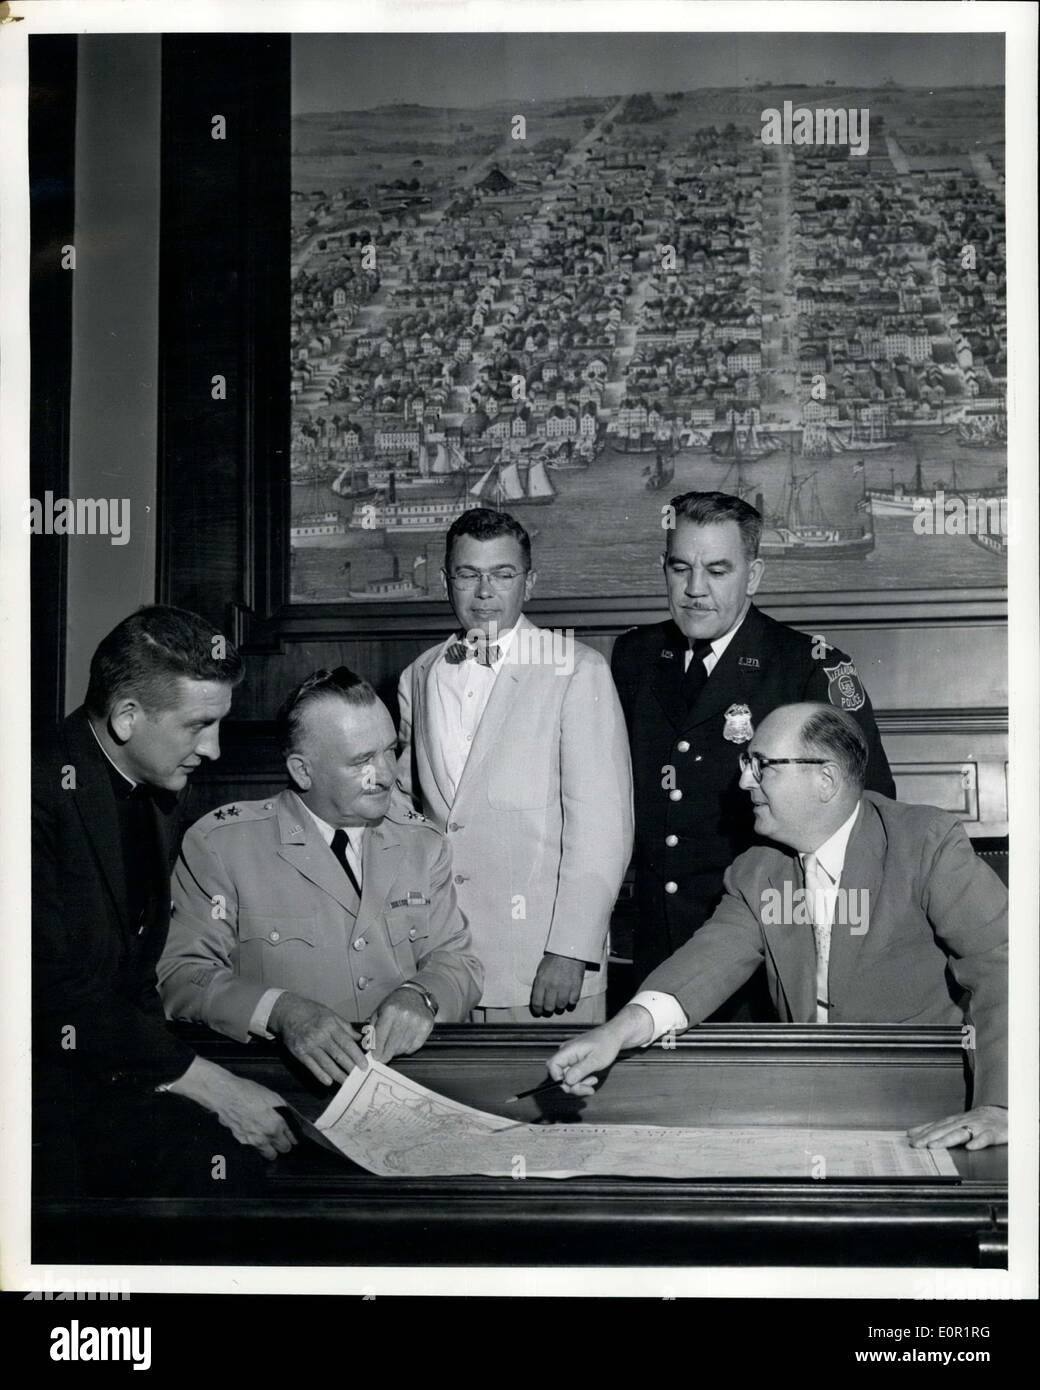 Sep. 20, 1957 - Major General David H. Tully, second from left, commanding general, the engineer center, Fort Belvoir, holds one of his periodic conferences with city officials in the council chamber at Alexandria, Virginia. They discuss subjects and activities of mutual interest. Left to right are Reverand Kenneth G. Phifer, a Presbyterian Minister. General Tully, city manager E.G. Heatwole, police chief Russel A Hames and Mayor Leroy S. Bendheim. Stock Photo